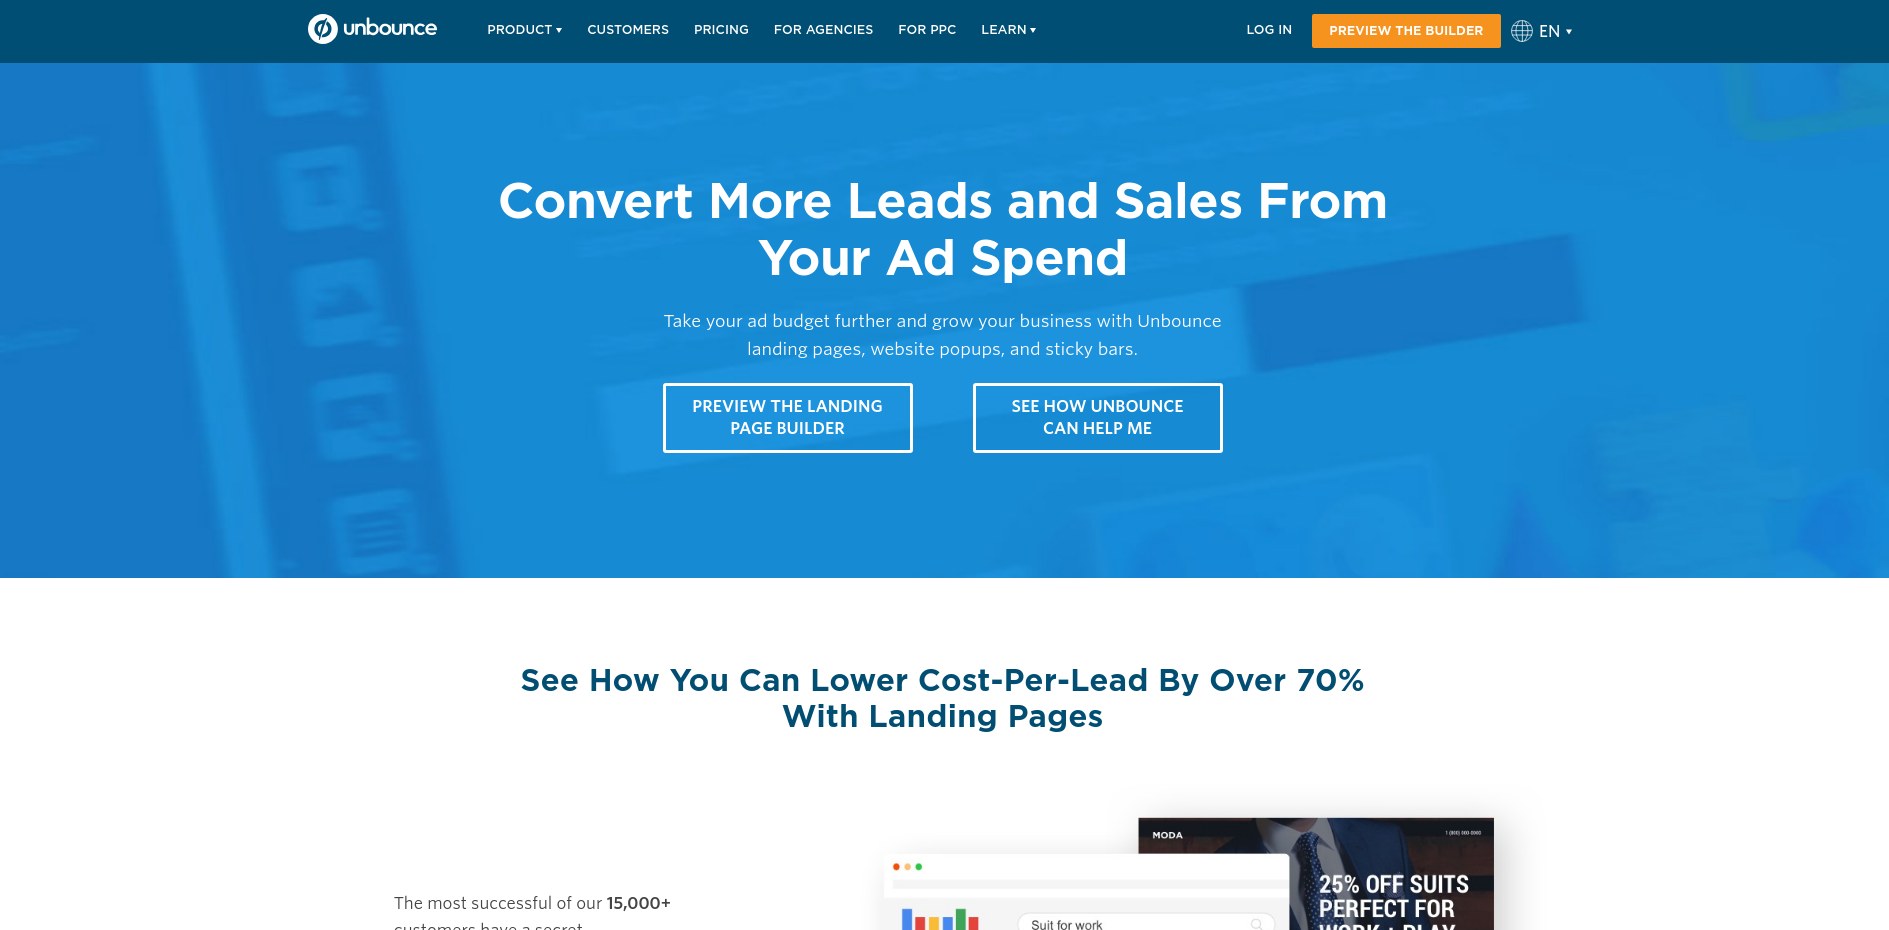 unbounce product marketing tool landing page